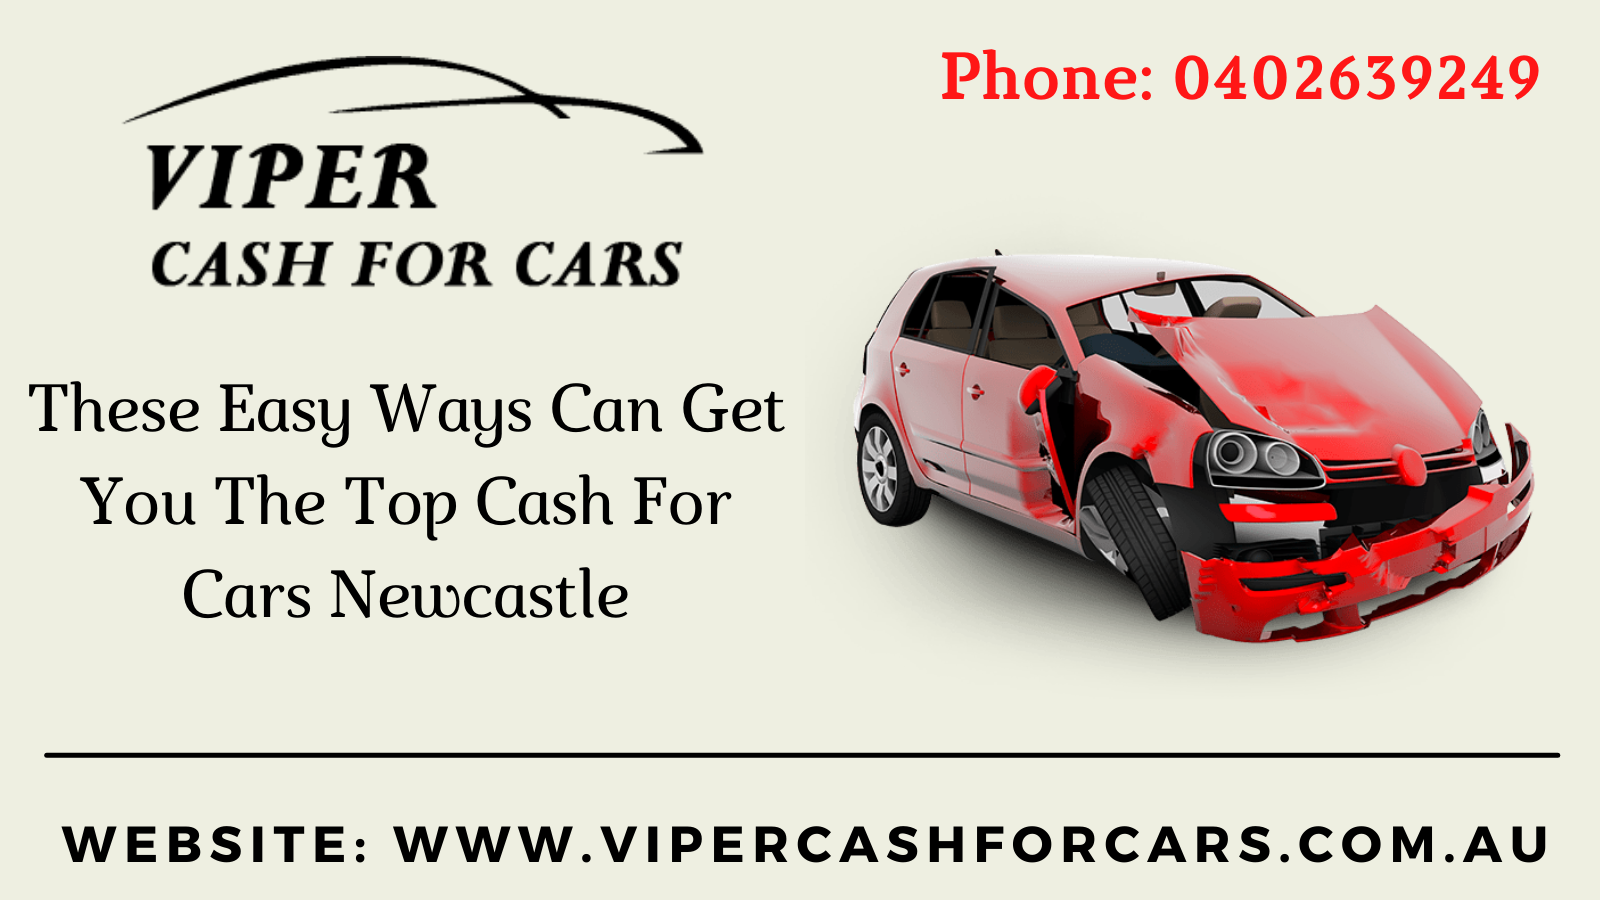 These Easy Ways Can Get You The Top Cash For Cars Newcastle